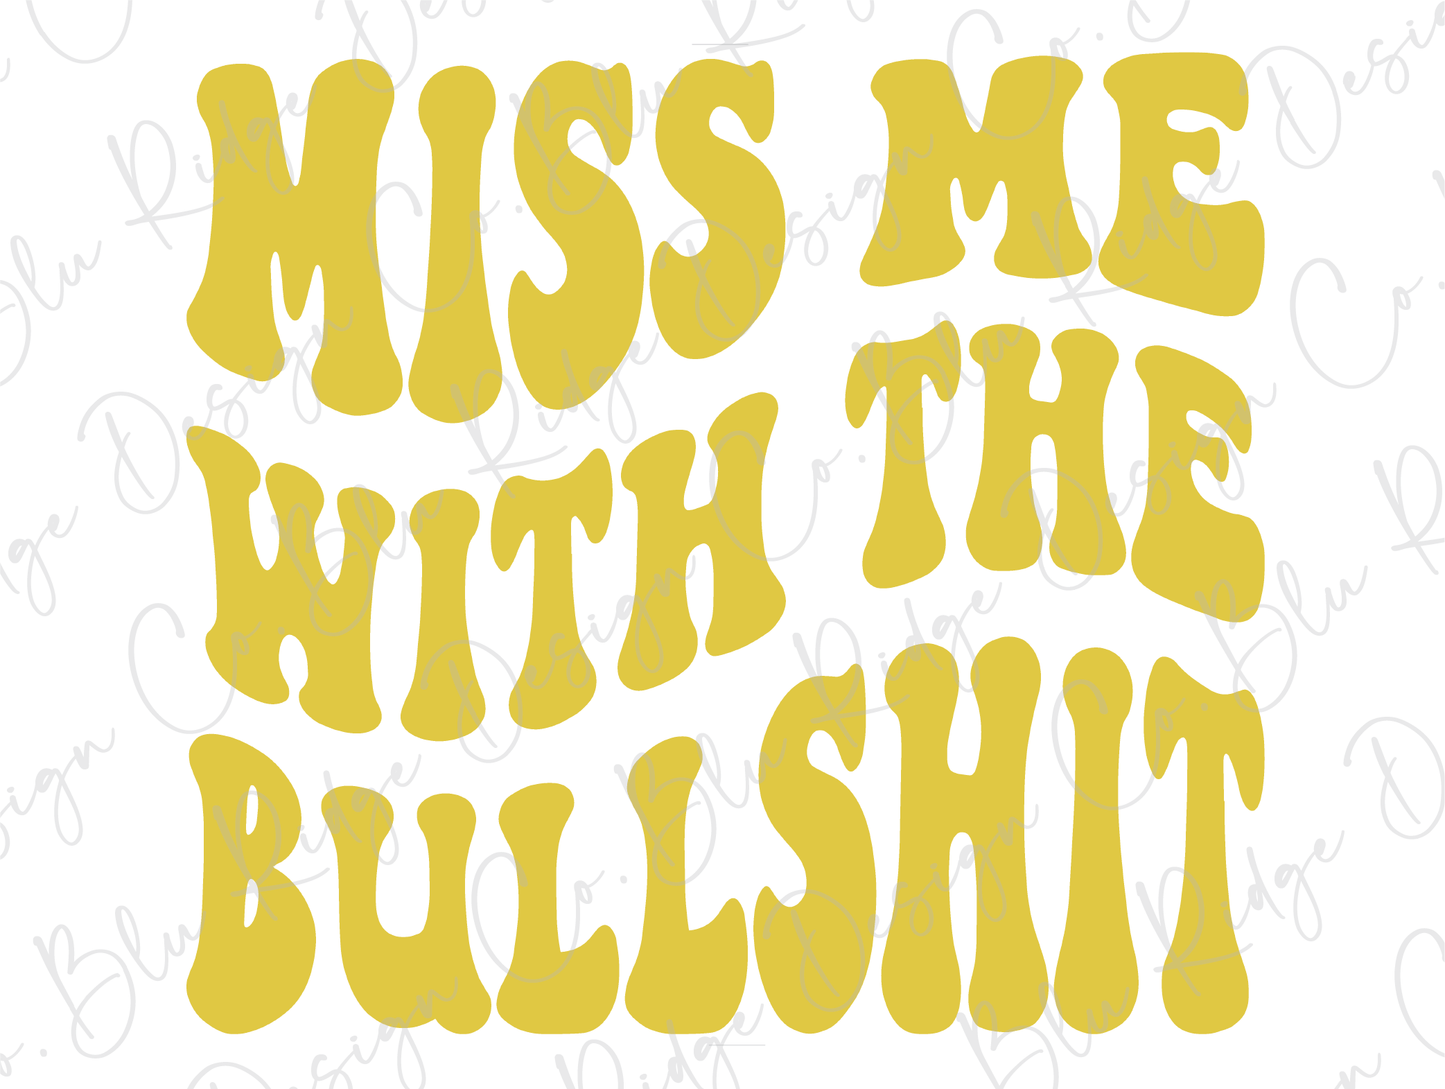 Miss Me With The Bullshit Wavy Stacked Retro Adult Humor Design. (Yellow). Direct To Film (DTF) Transfer